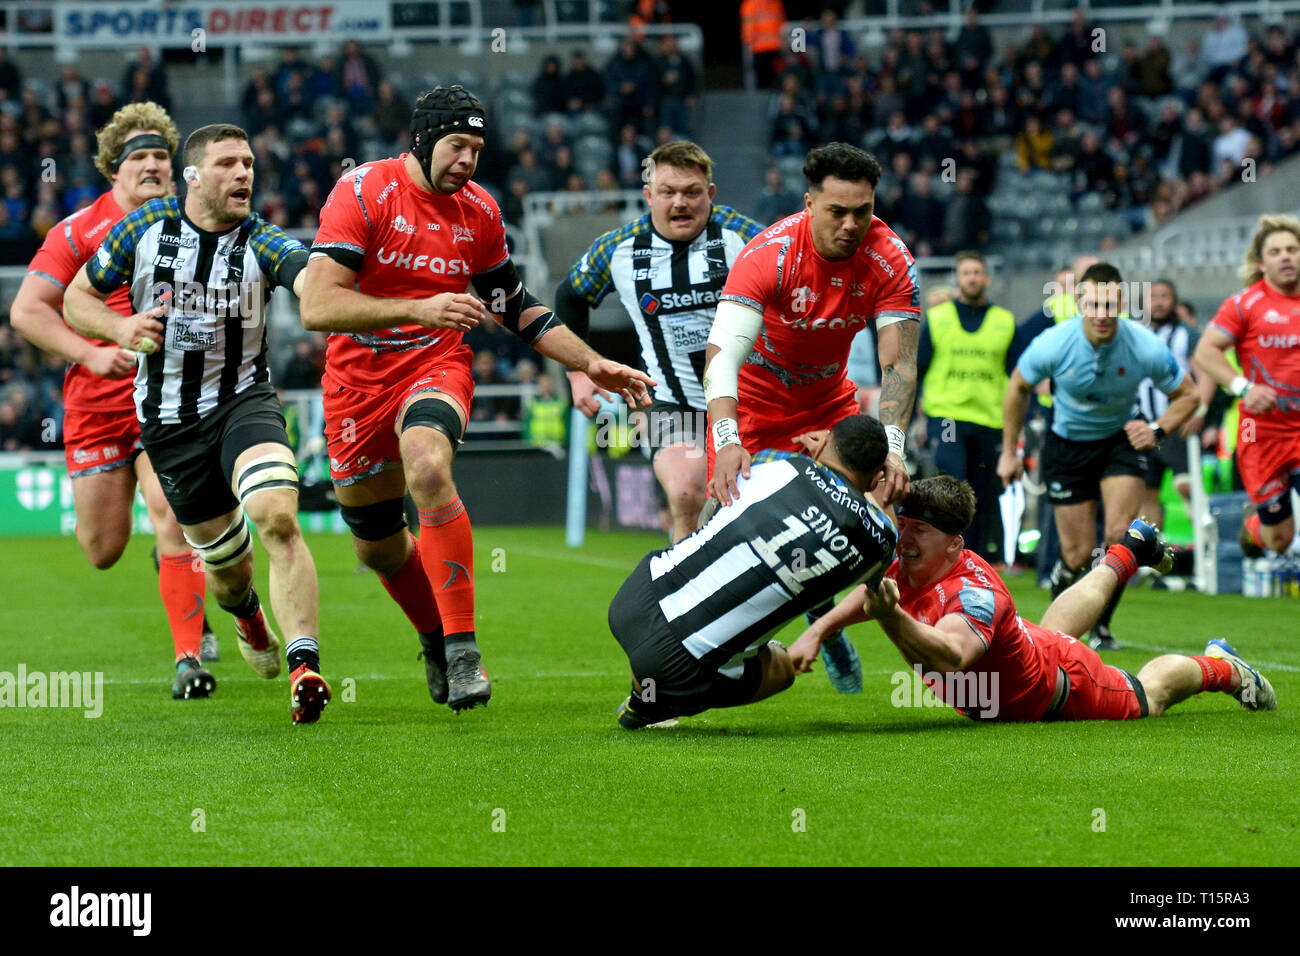 Newcastle Falcons vs. Sale Sharks, 23 March 2019, St. James Park Stadium in Newcastle, Northeast England, UK Stock Photo